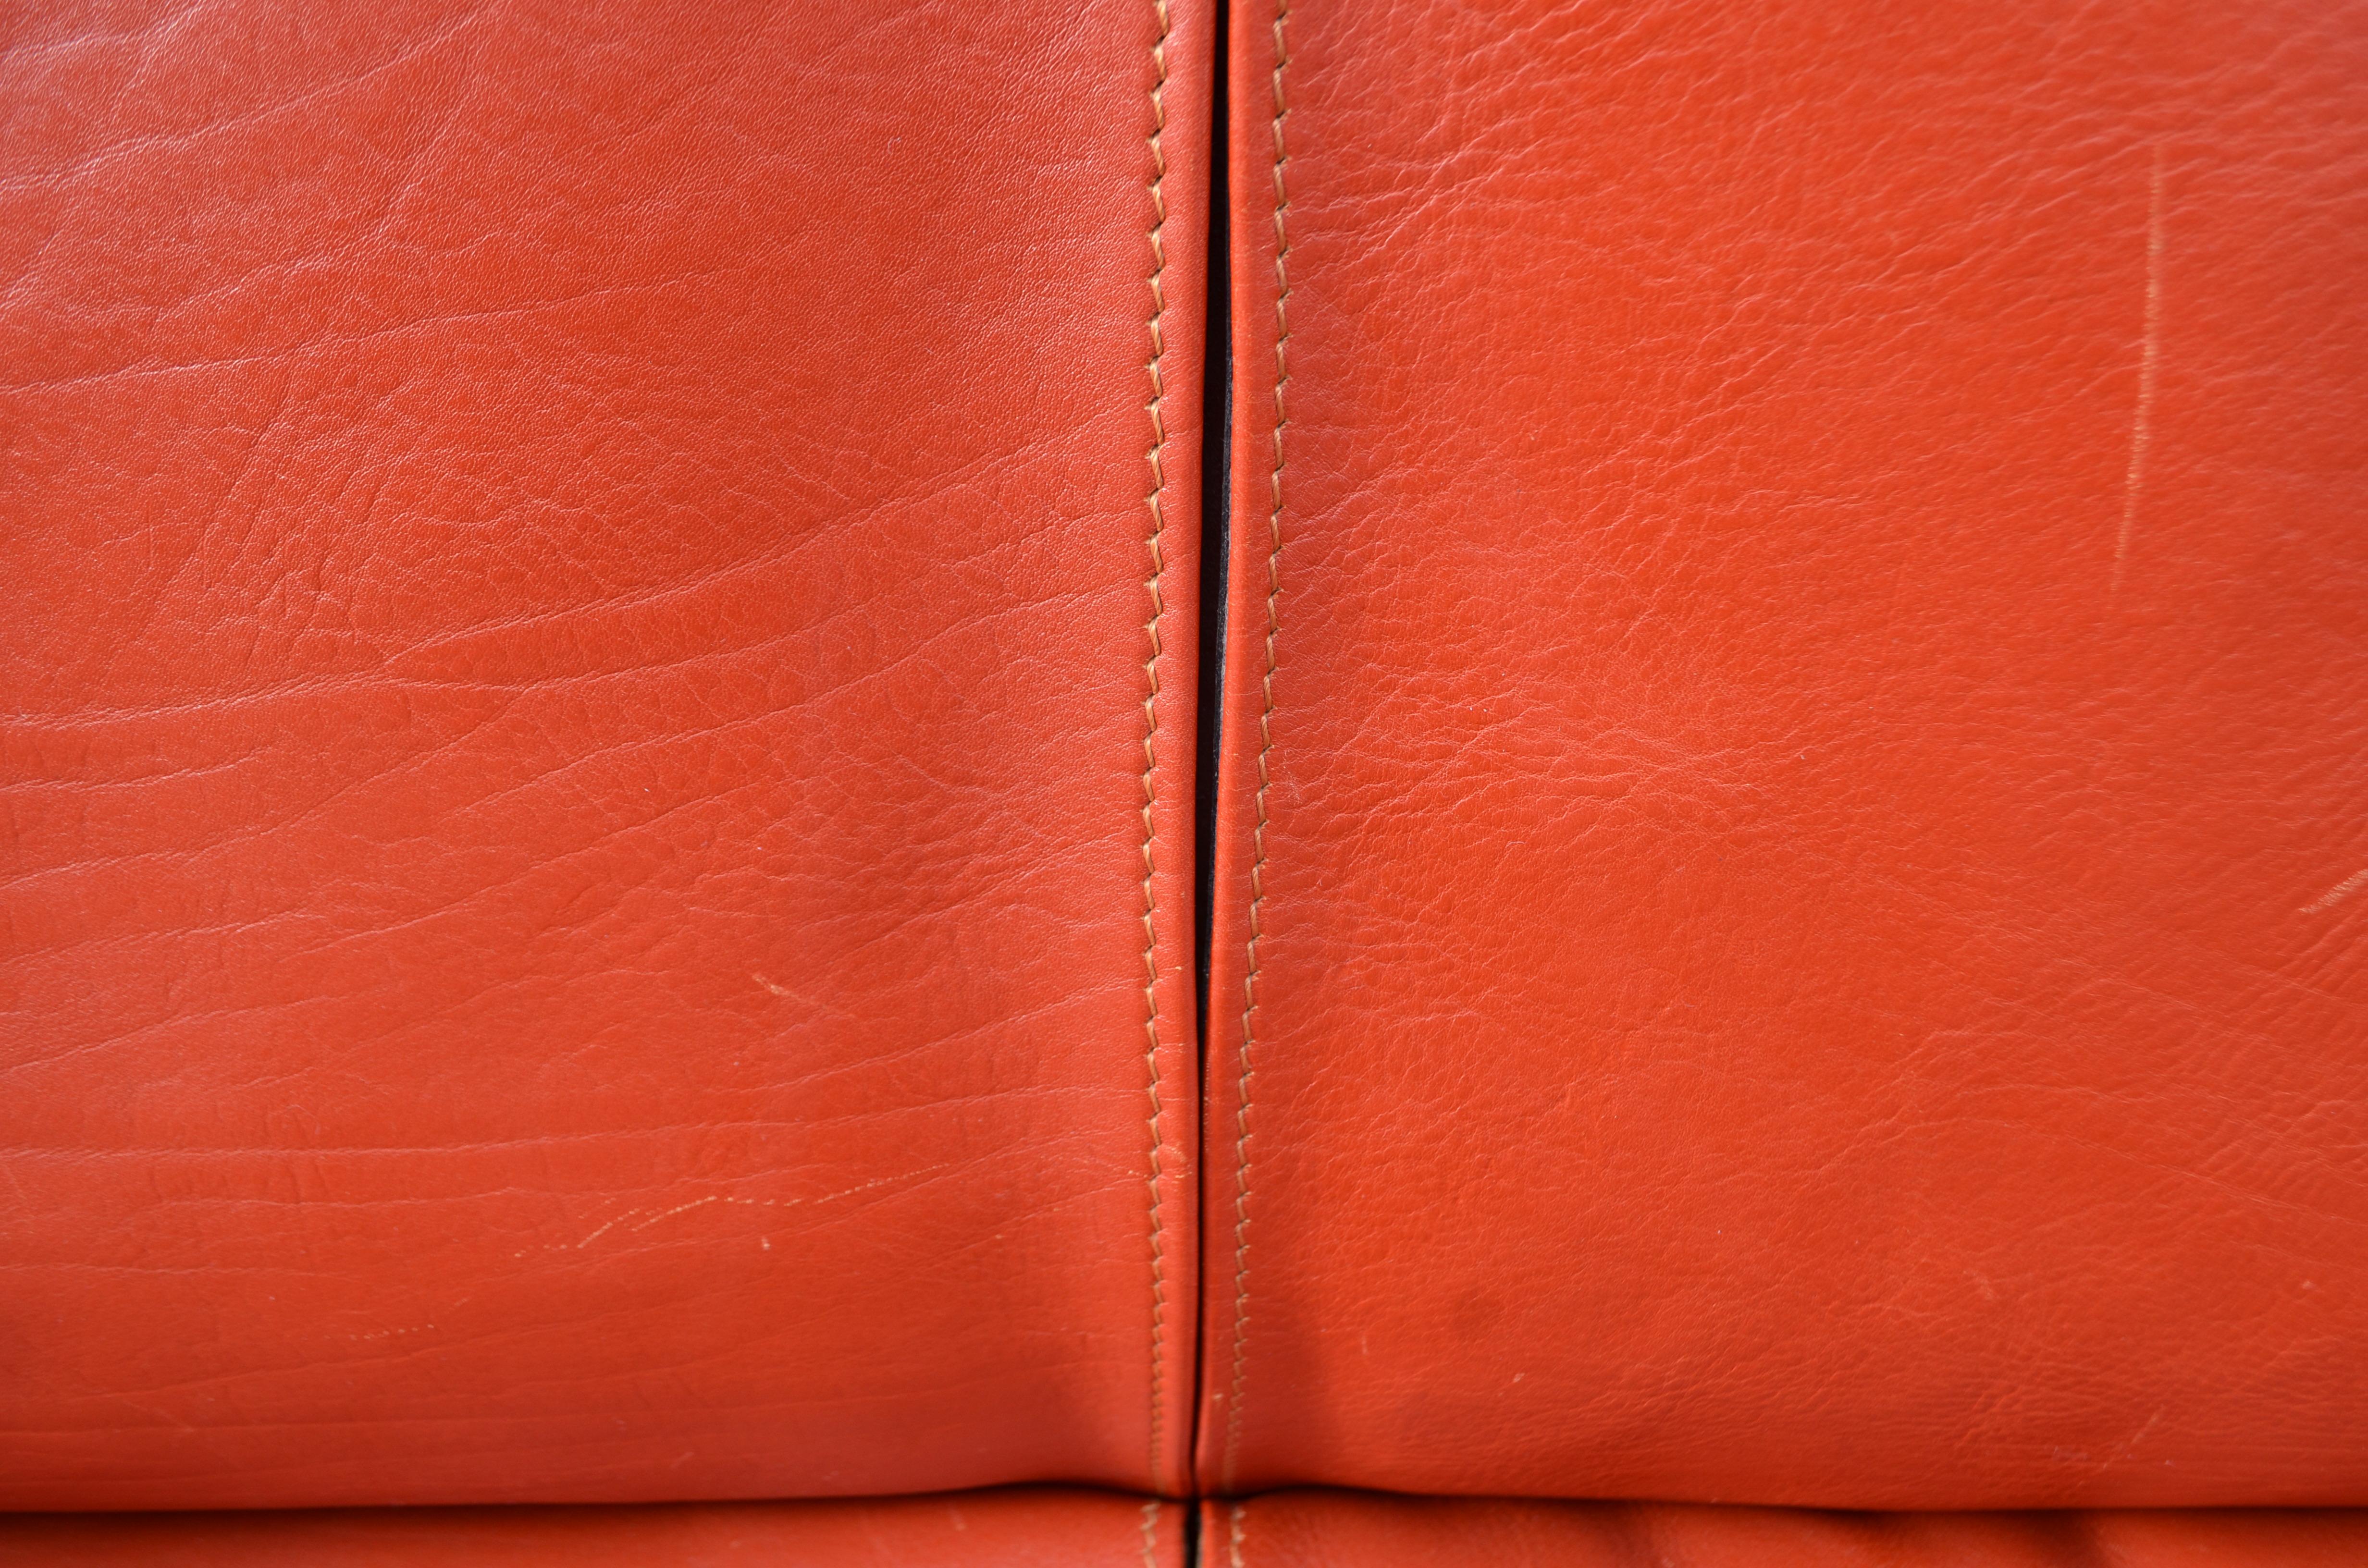 Cassina Cab 415 Neck Saddle Leather Sofa China Red / Ox Red For Sale 3